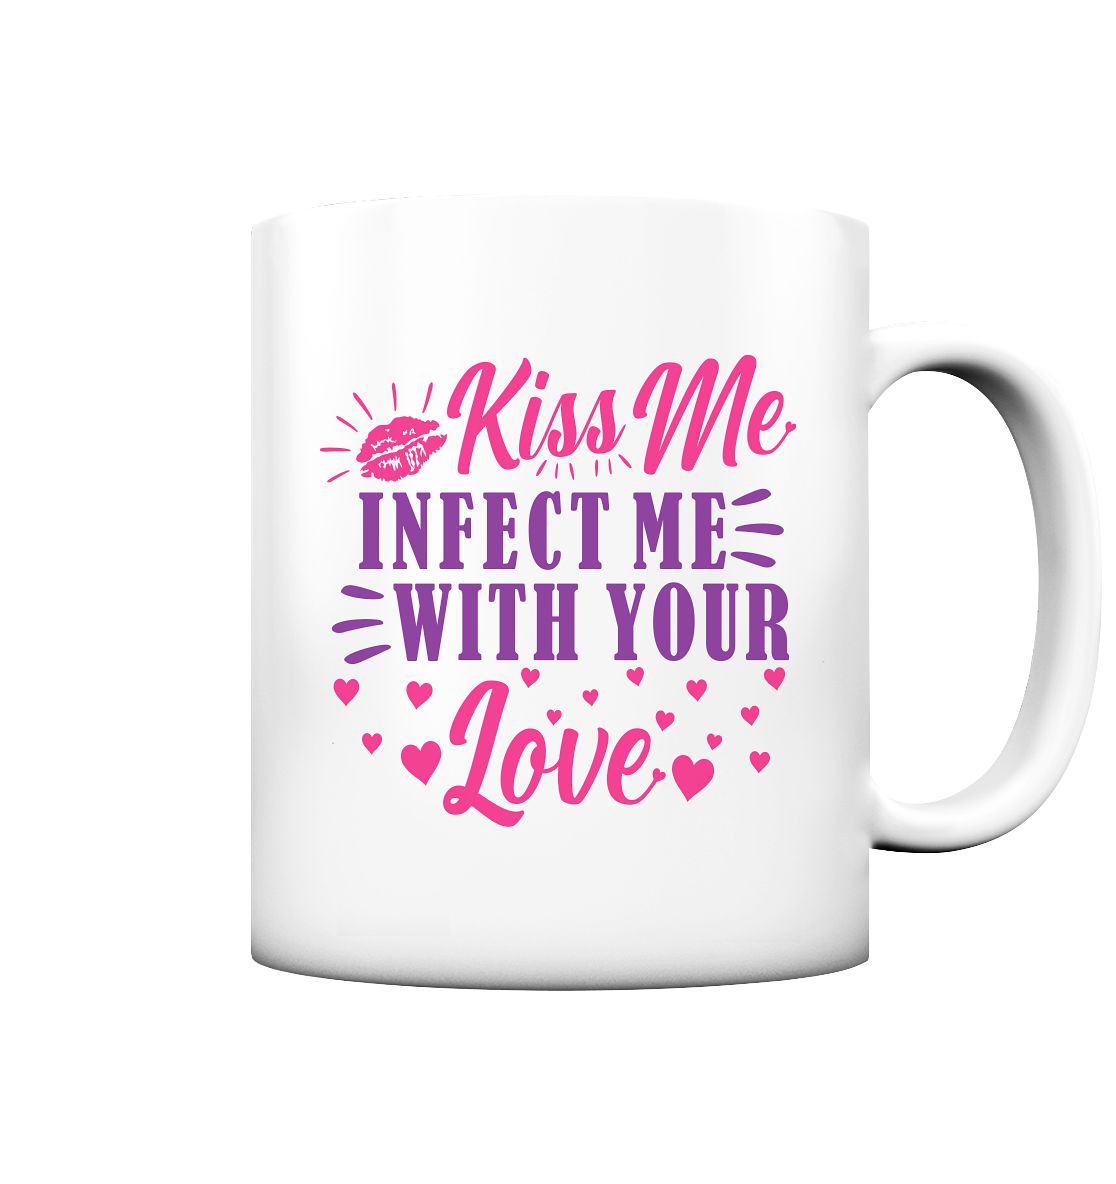 Kiss me infect me with your love - Tasse matt